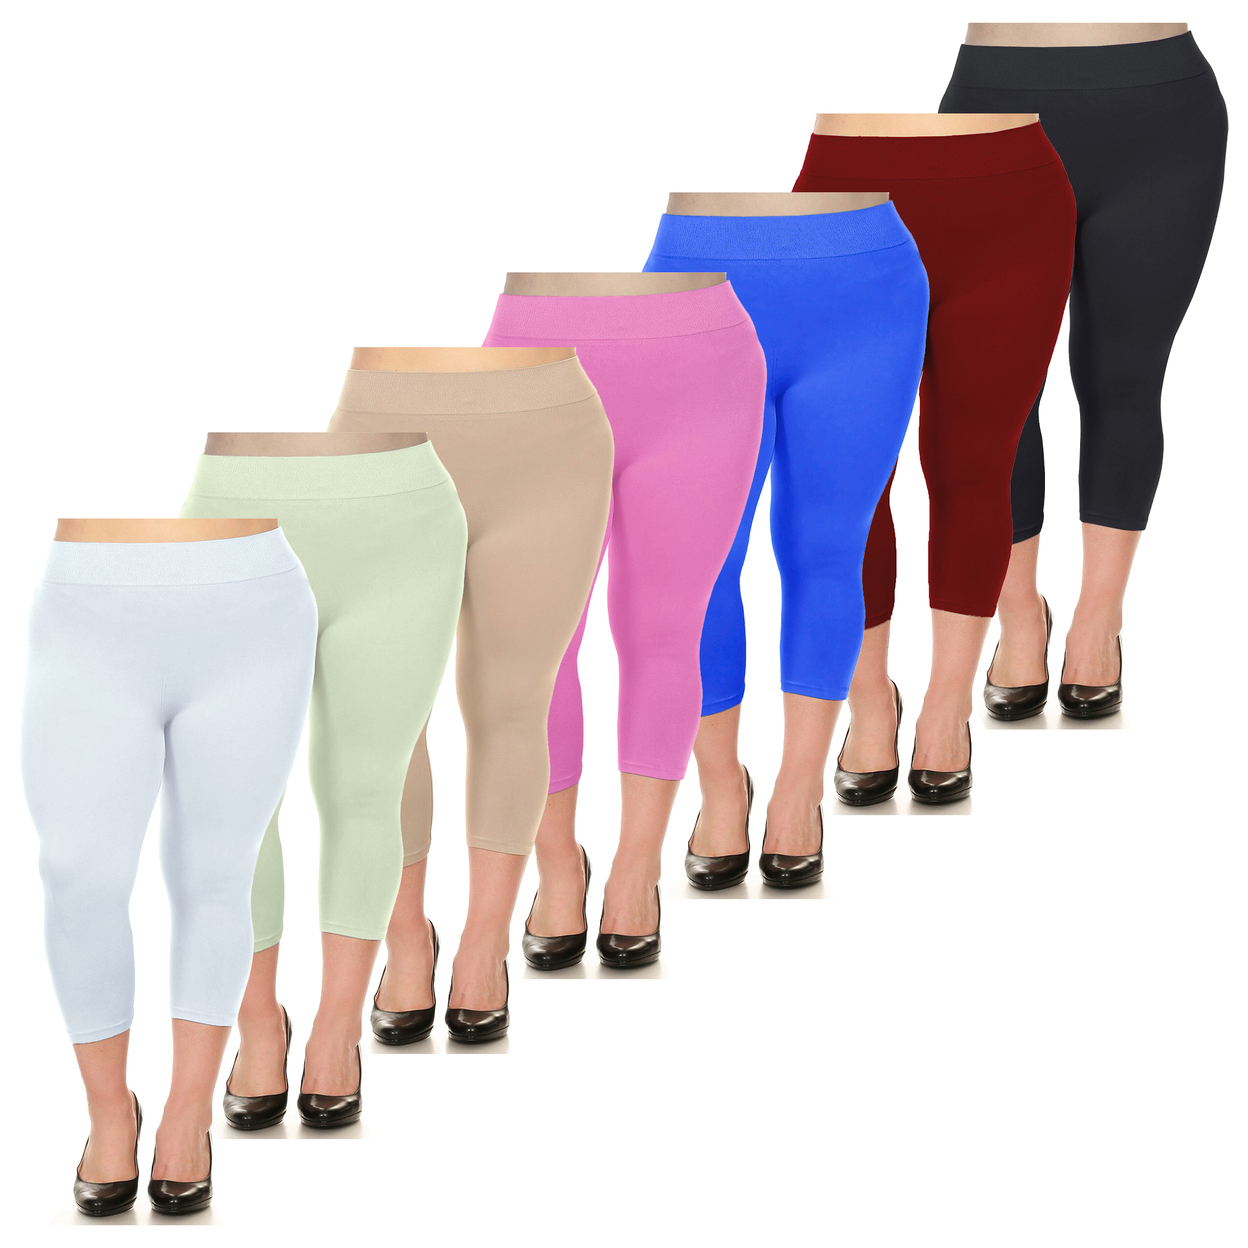 2-Pack: Women's Ultra-Soft High Waisted Smooth Stretch Active Yoga Capri Leggings Plus Size Available - Beige & Red, 2x